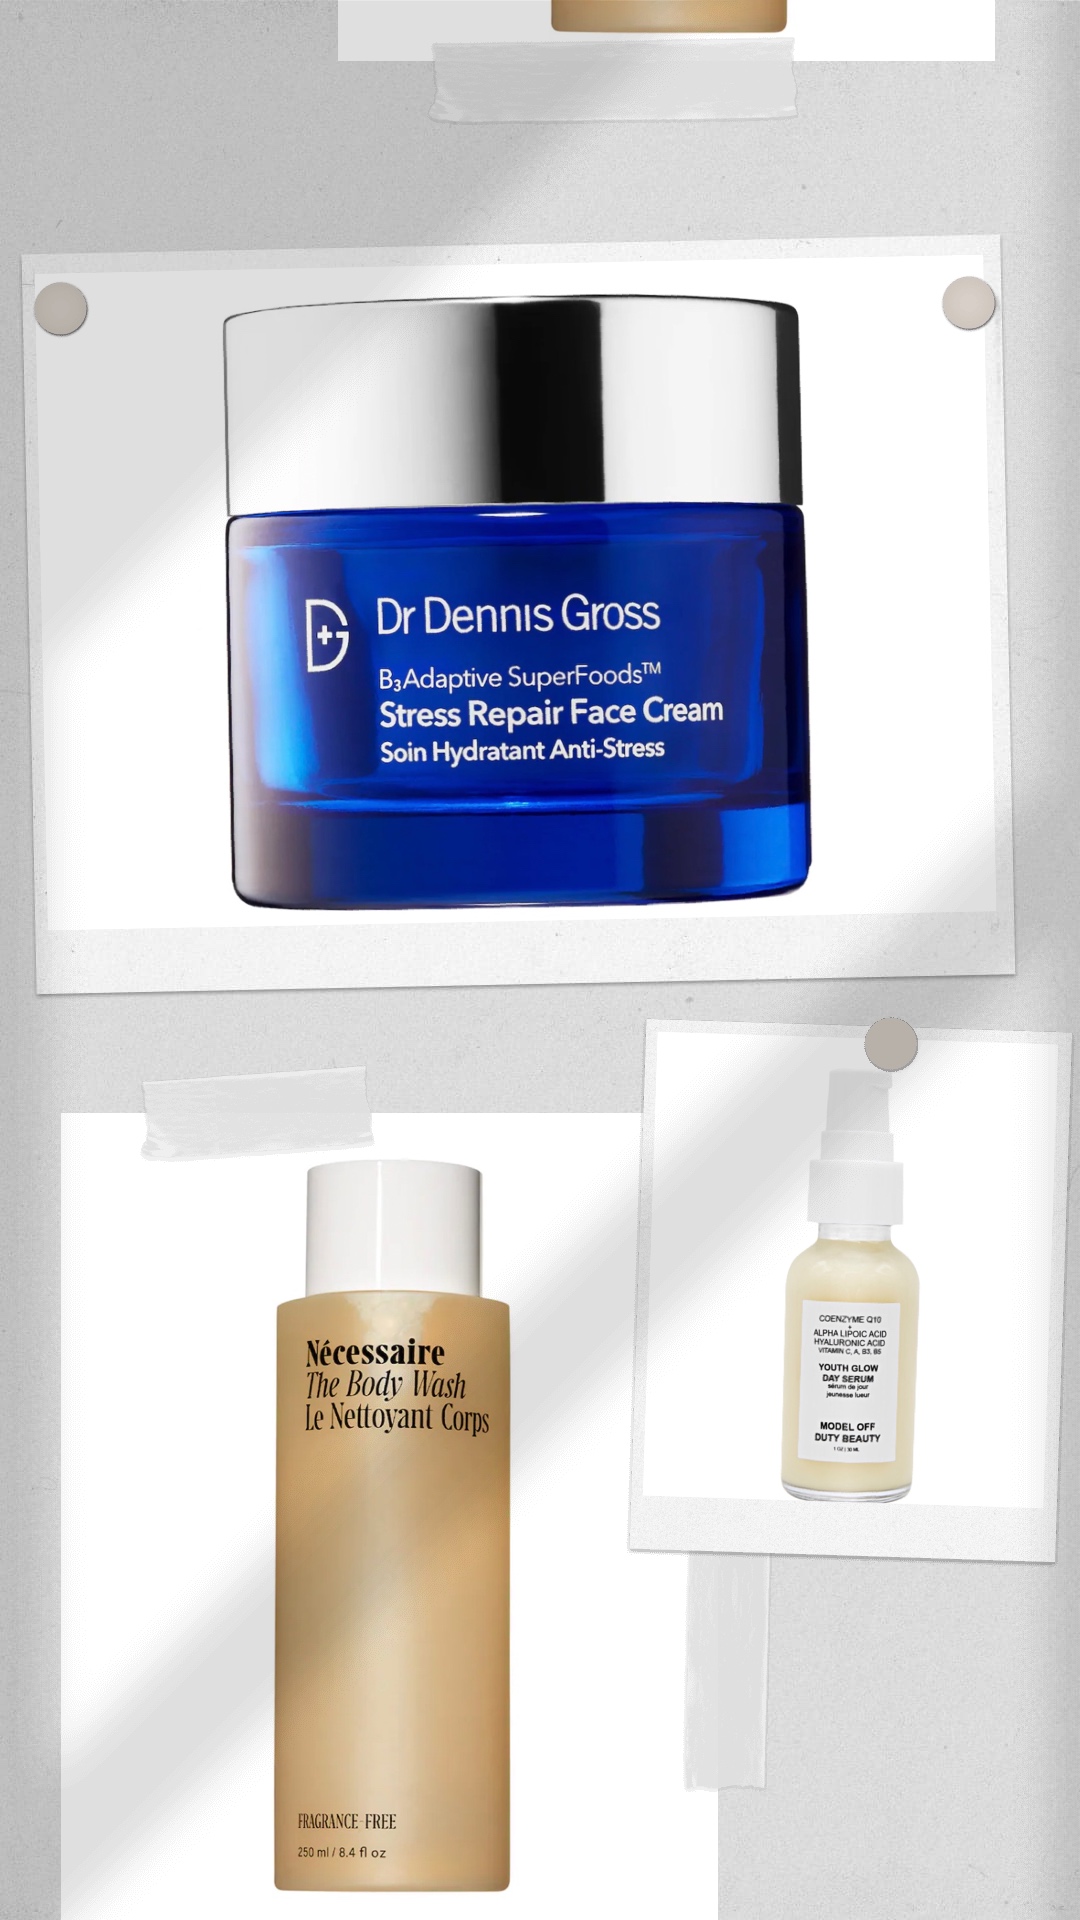 best niacinamide products